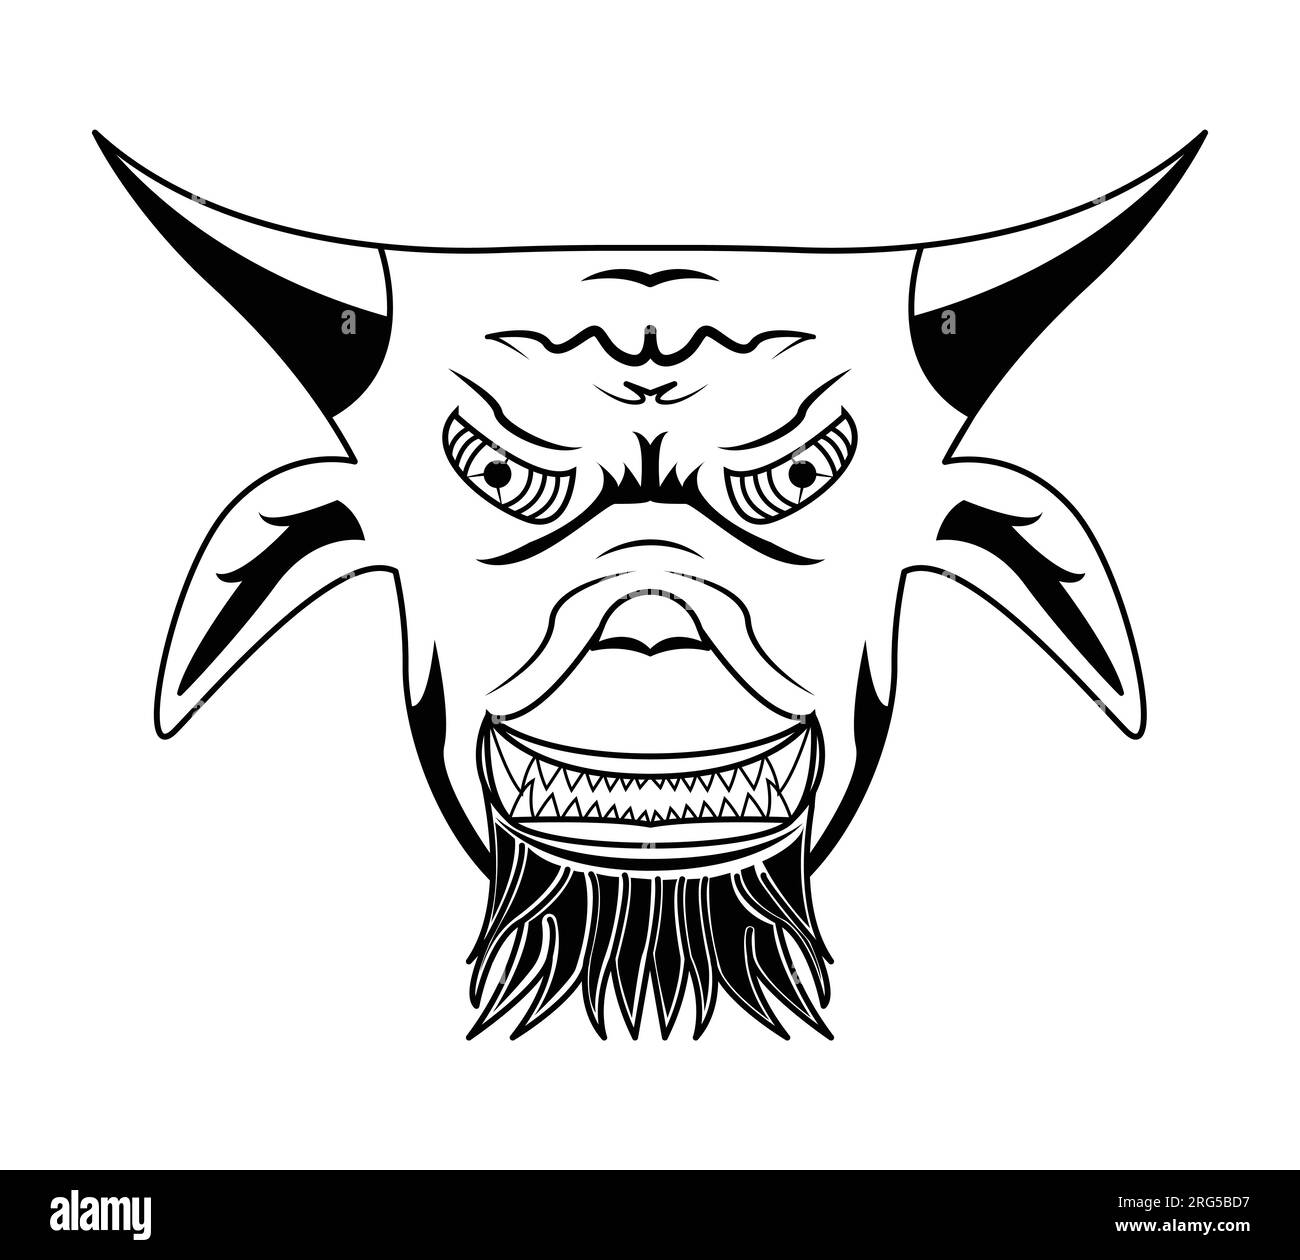 buffalo head icon with unique eyes. goat head with unique eyes. sketch of a buffalo or goat head. vectors, illustrations, icons, avatars and logos. Stock Vector